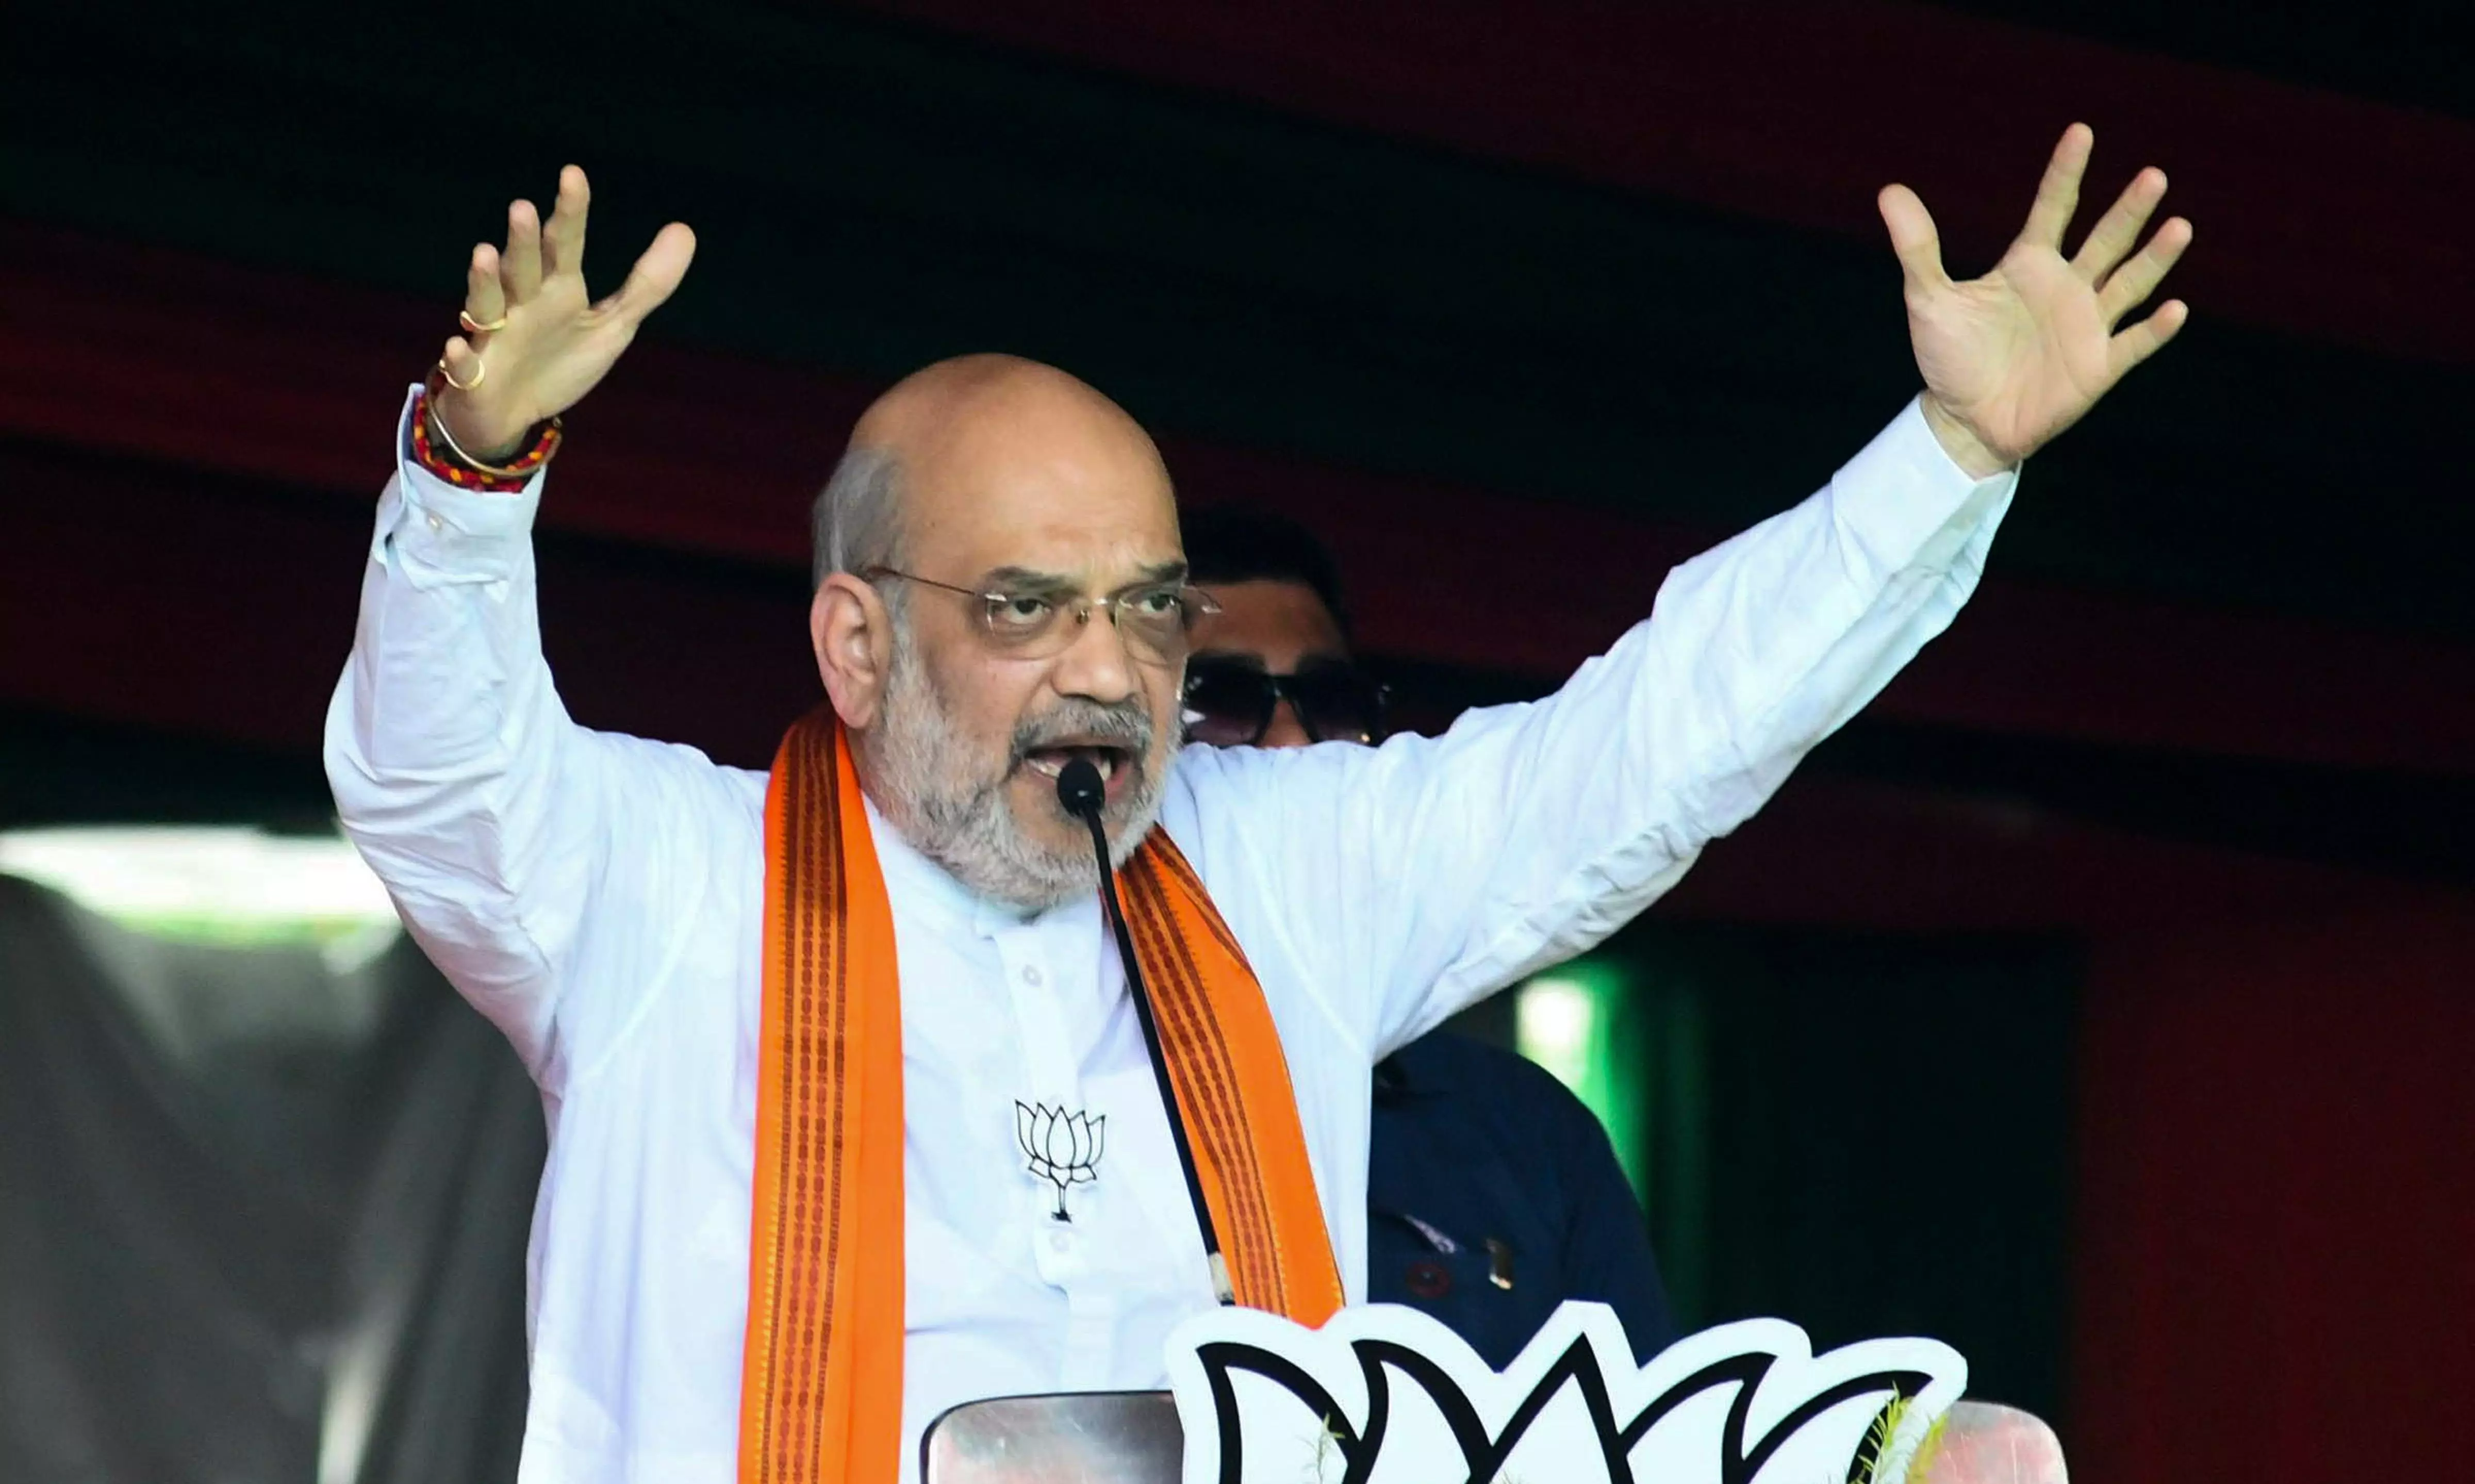 For Congress, Jharkhand is ATM of corruption, alleges Amit Shah at a rally in Jamtara